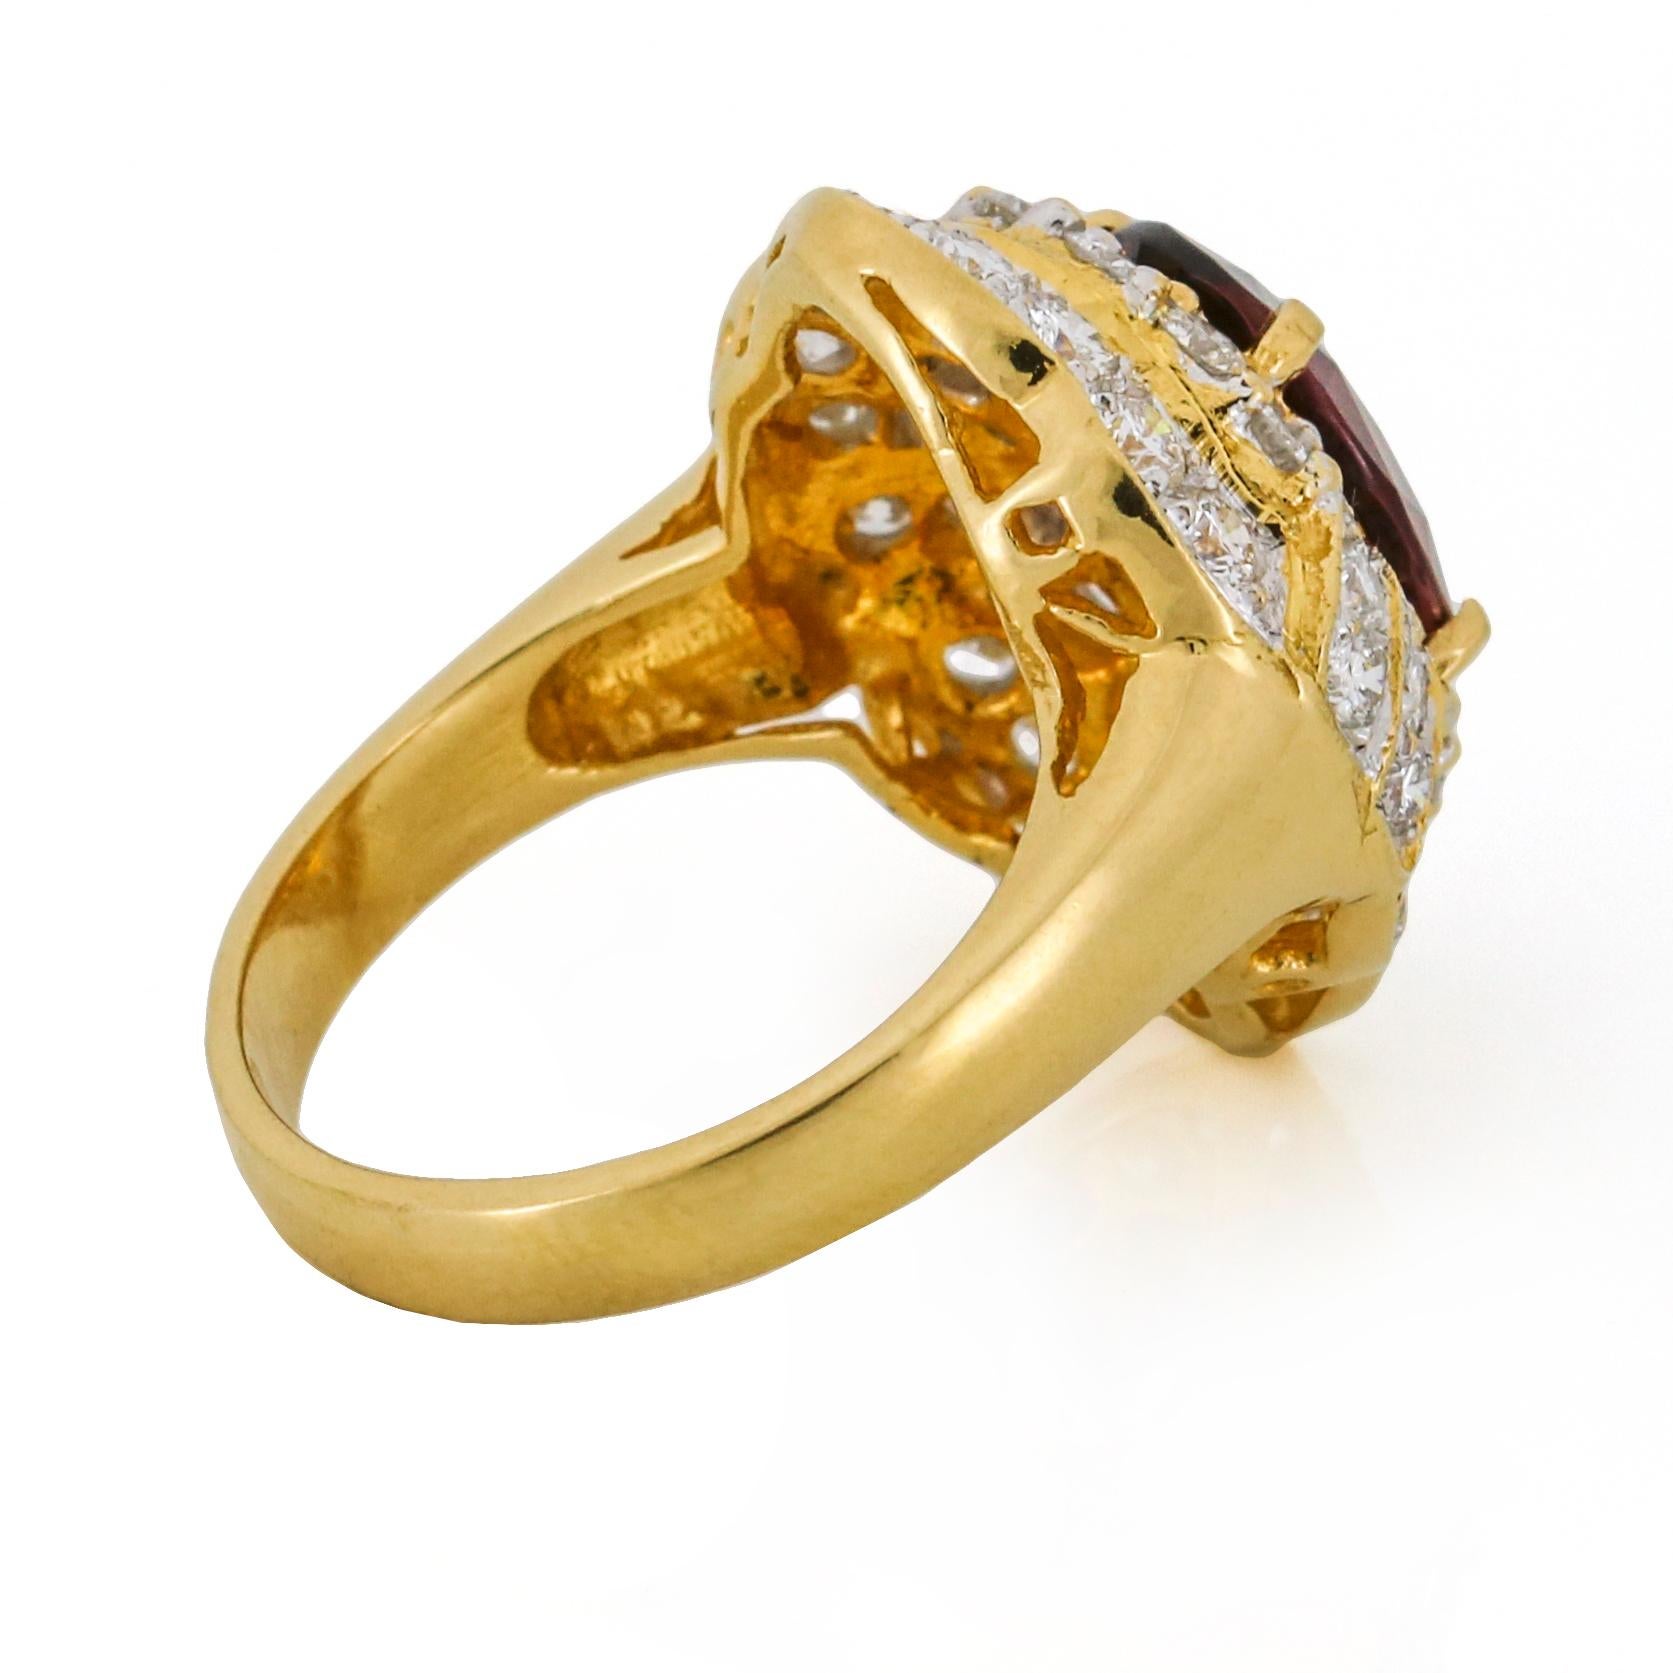 GIA 3.25 Carat Red Spinel Diamond Cocktail Ring in 18 Karat Yellow Gold In Excellent Condition For Sale In Fort Lauderdale, FL